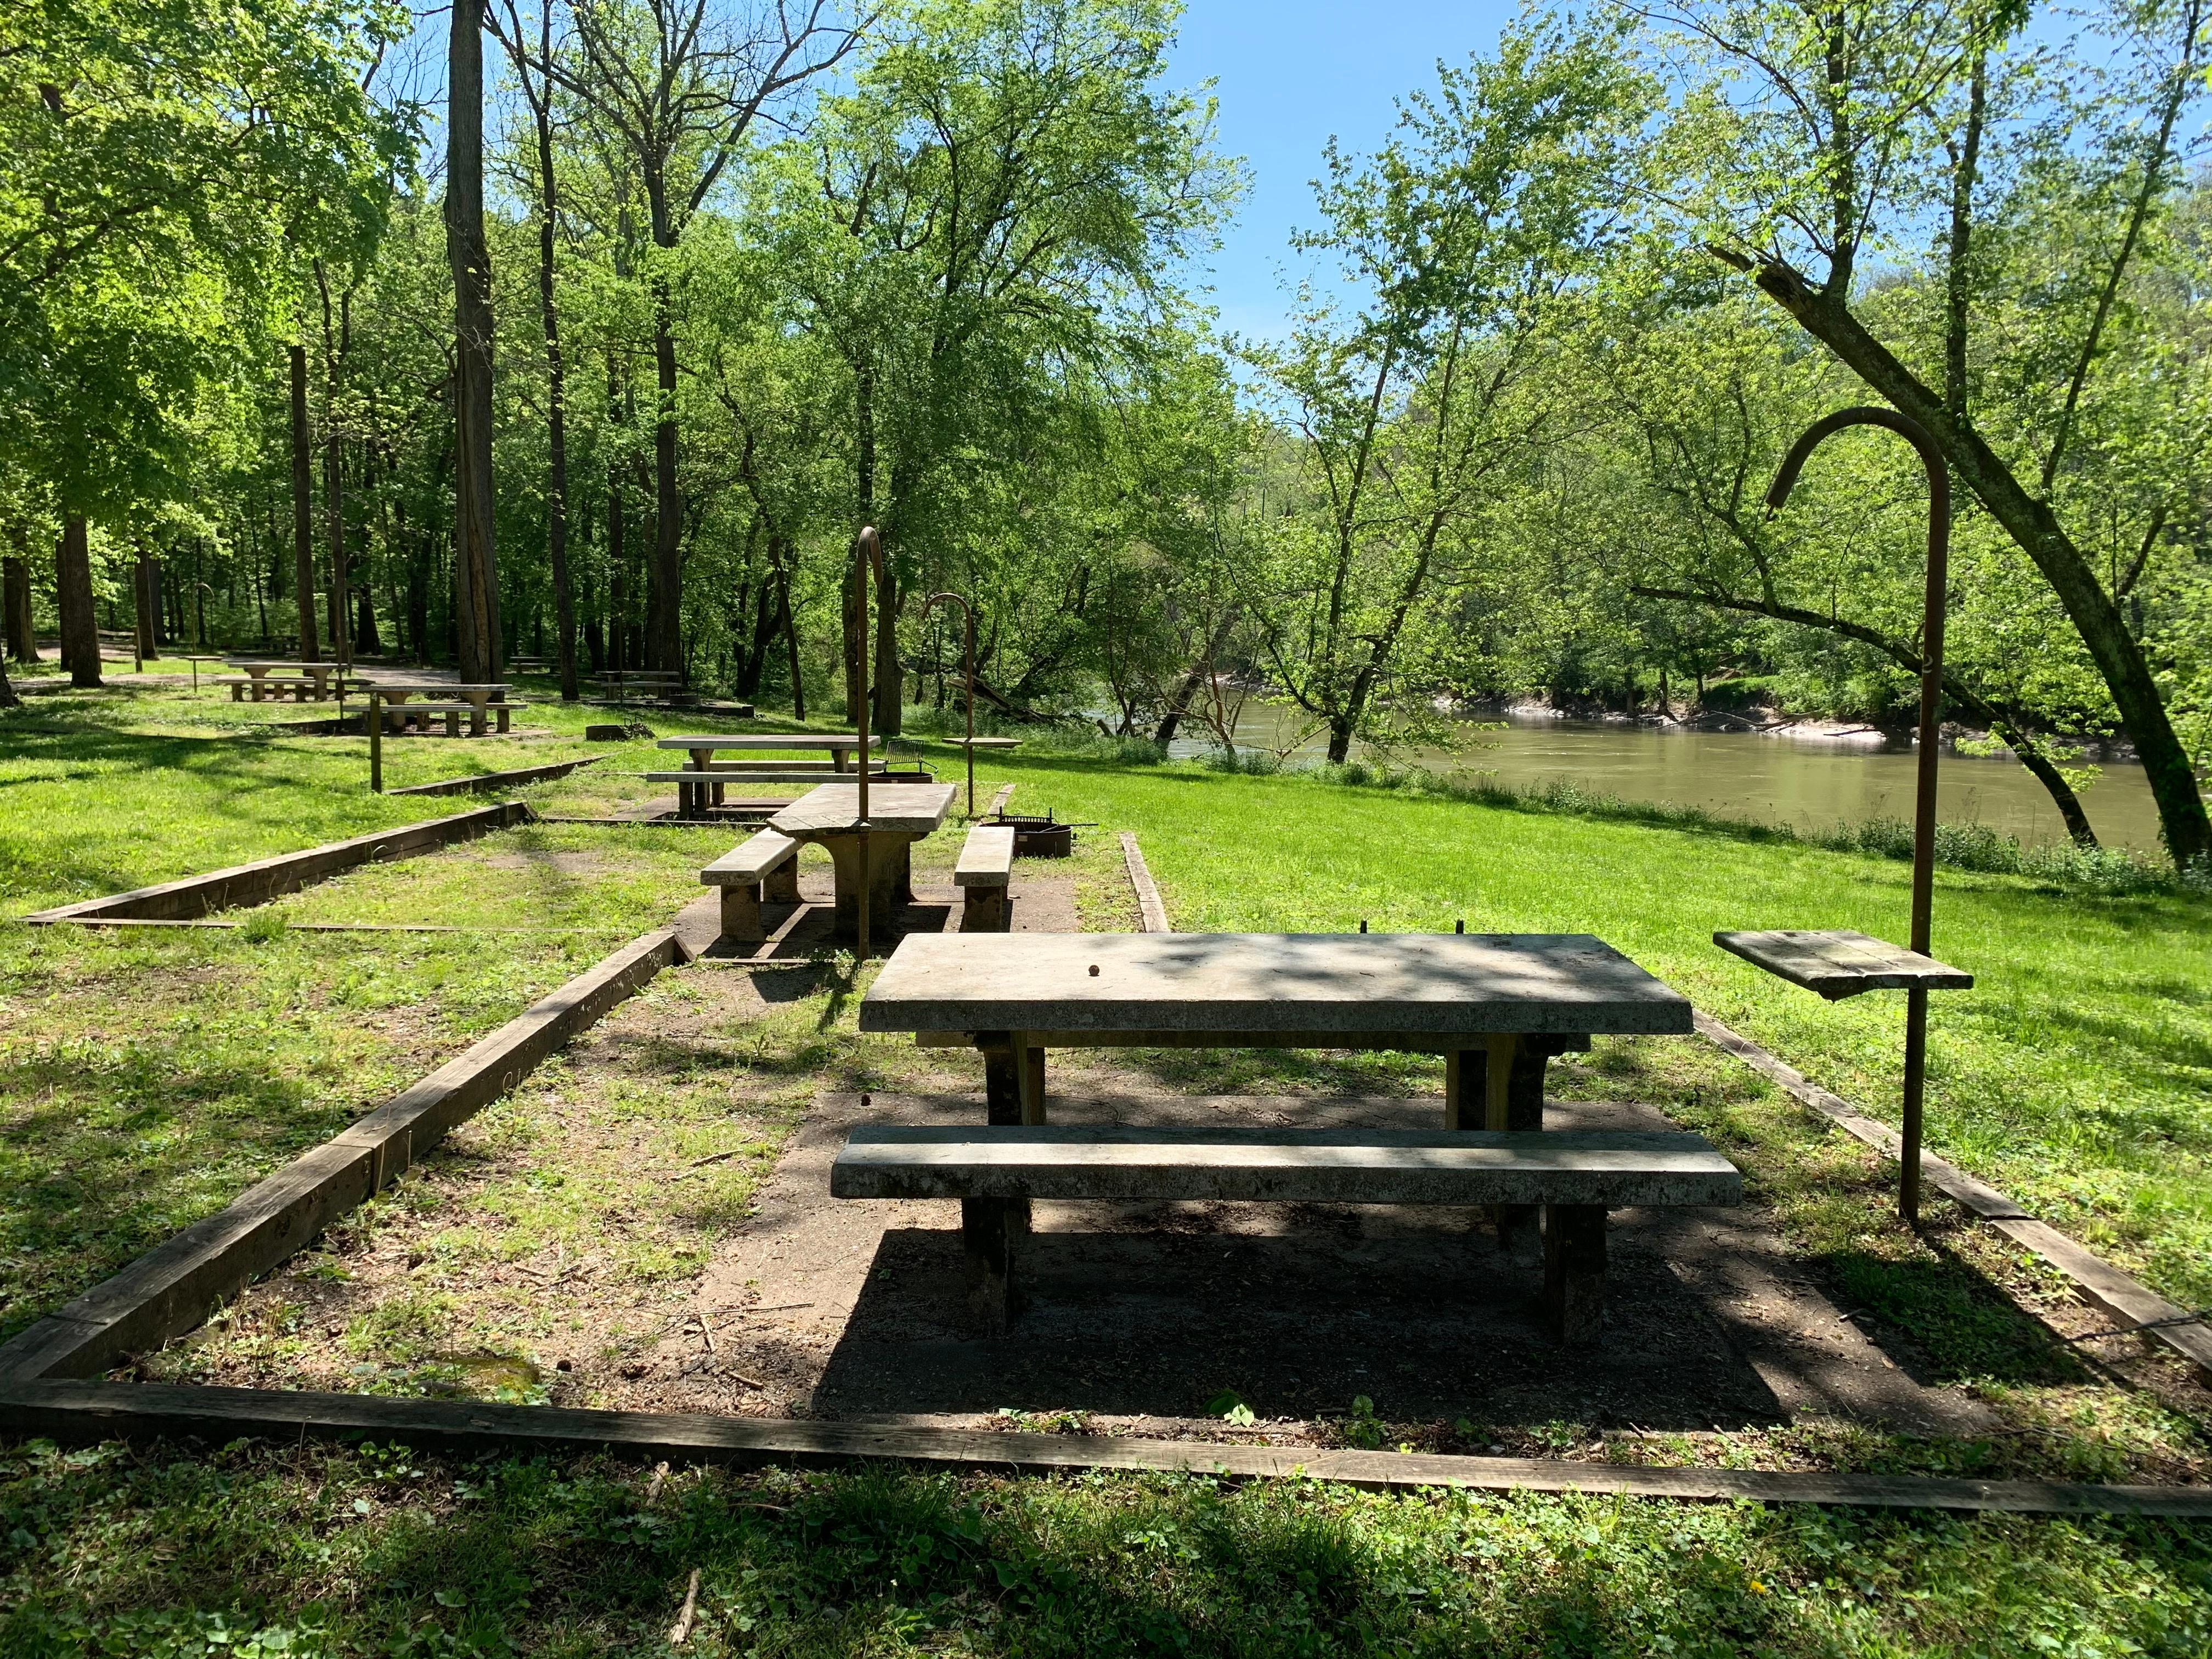 Campsites with picnic tables nearby the river.